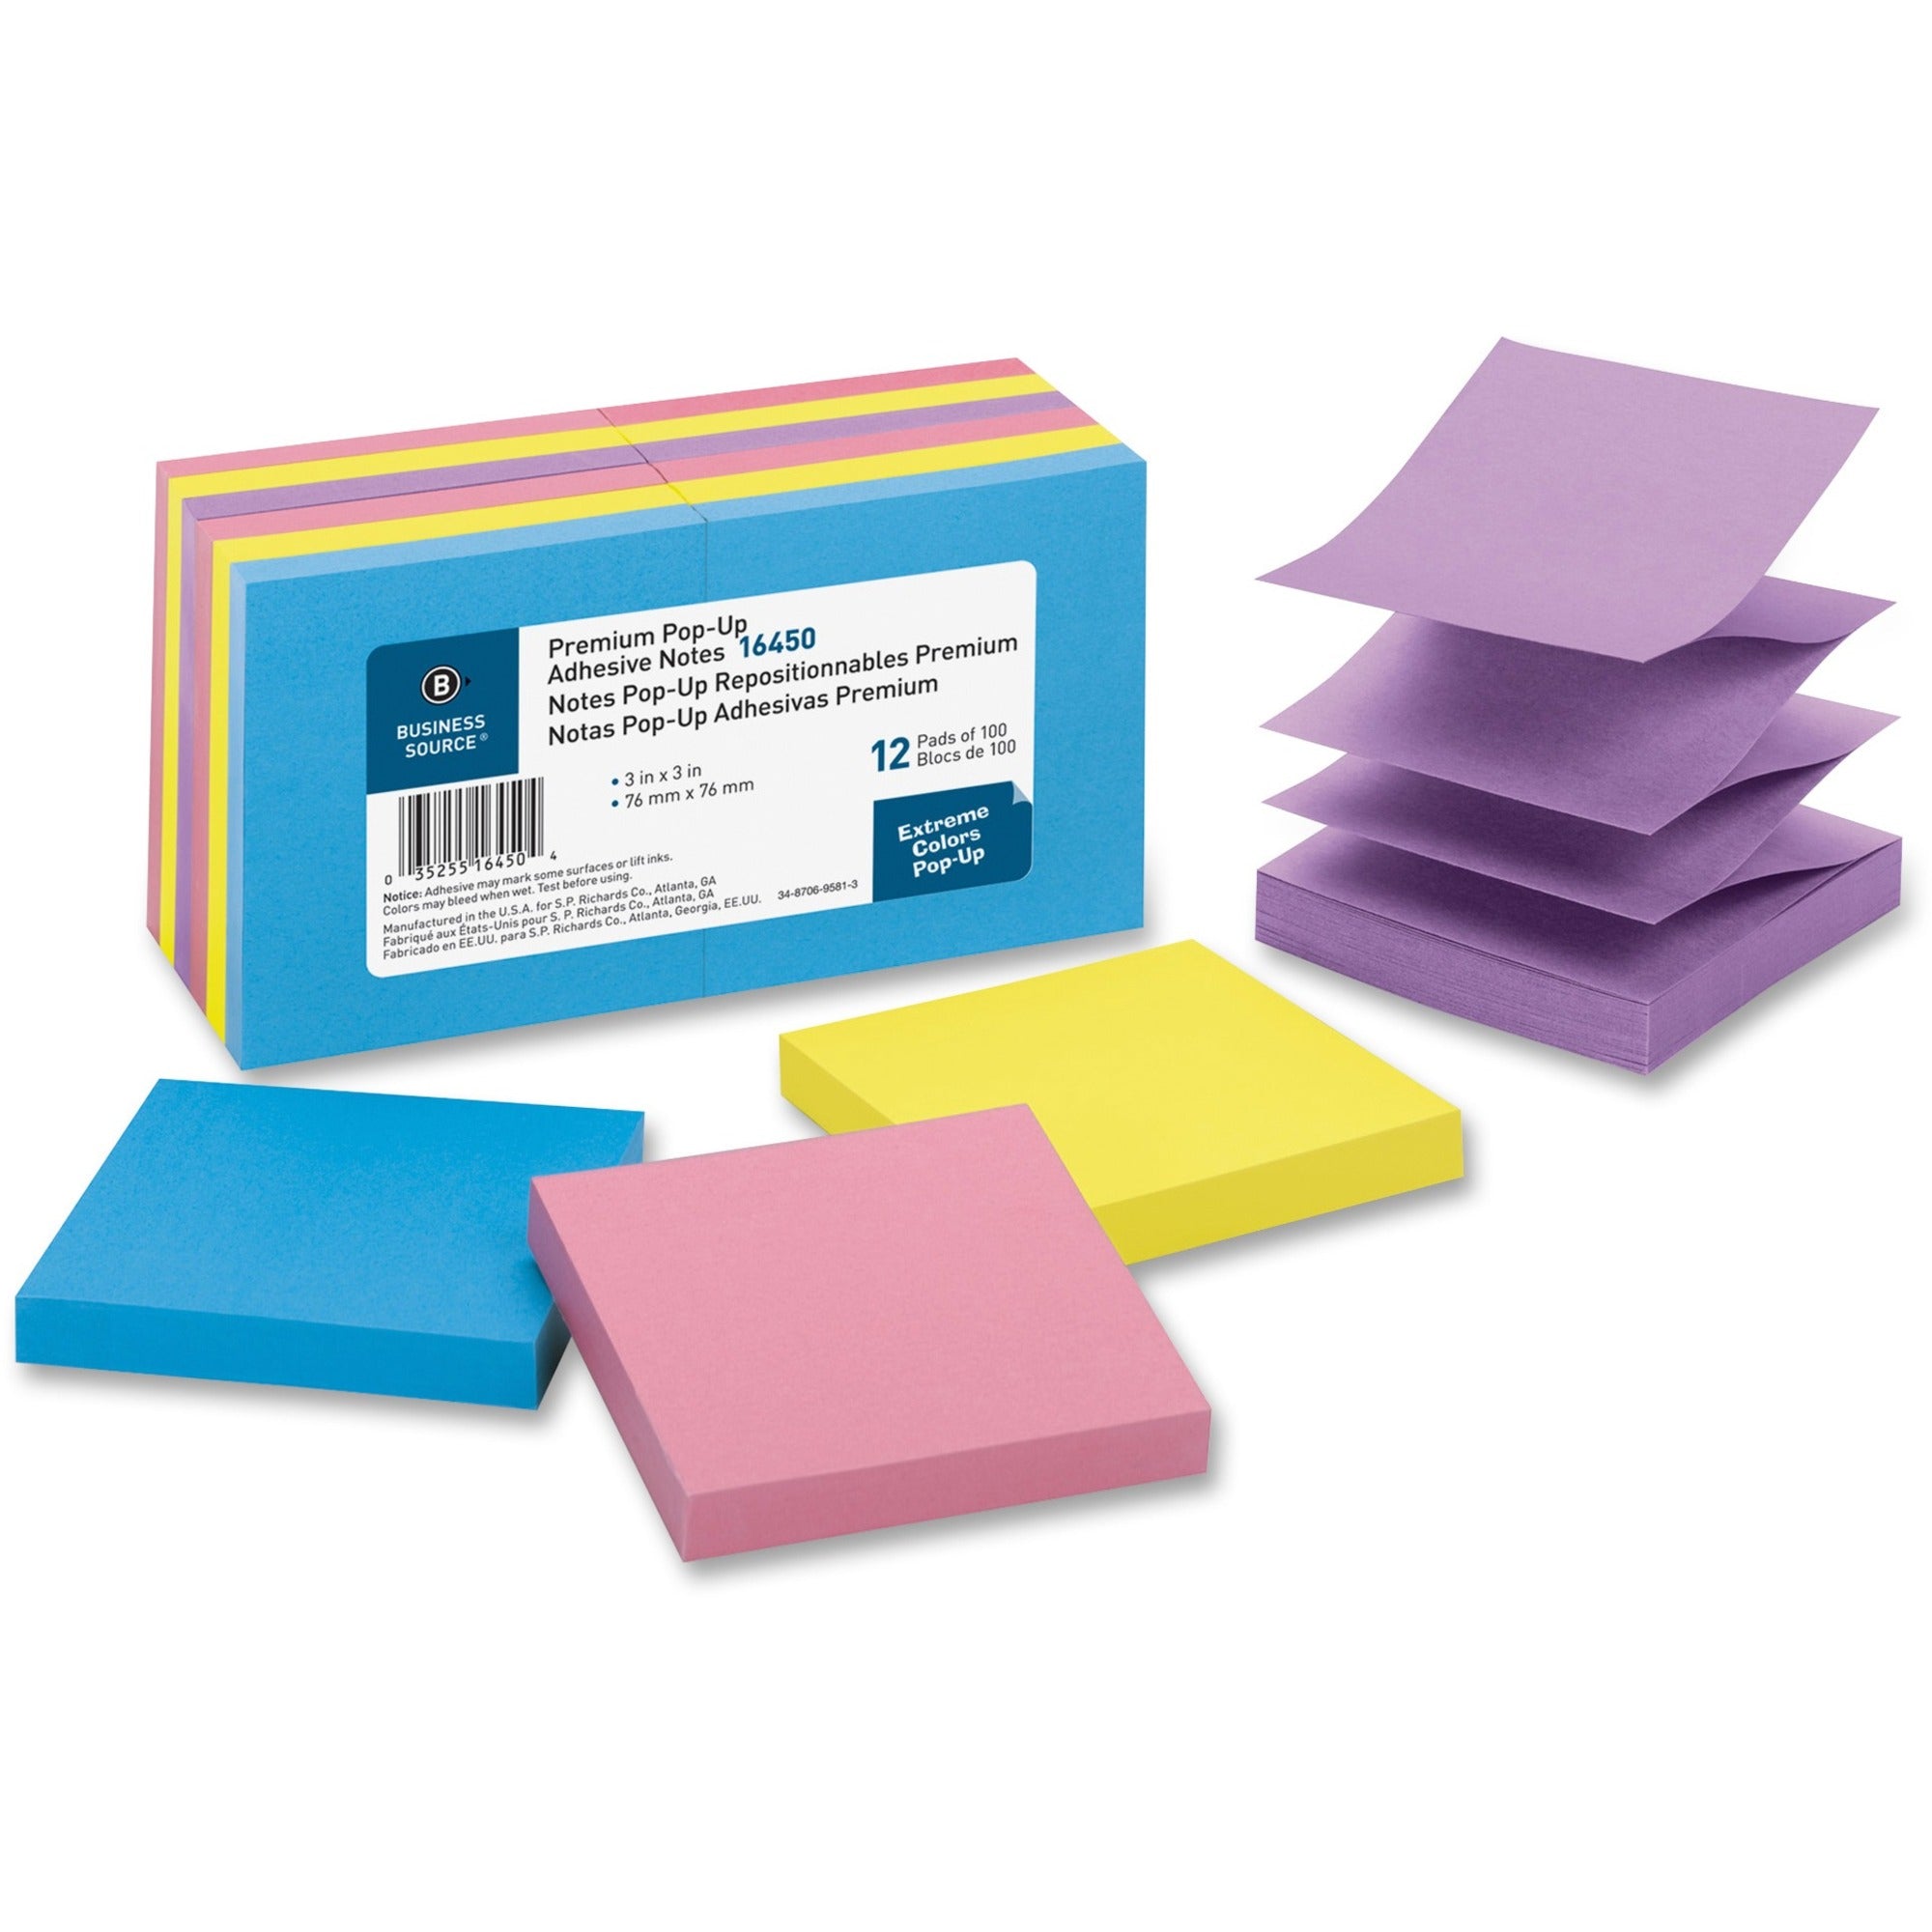 Business Source Reposition Pop-up Adhesive Notes - 3" x 3" - Square - Assorted - Removable, Repositionable, Solvent-free Adhesive - 12 / Pack - 